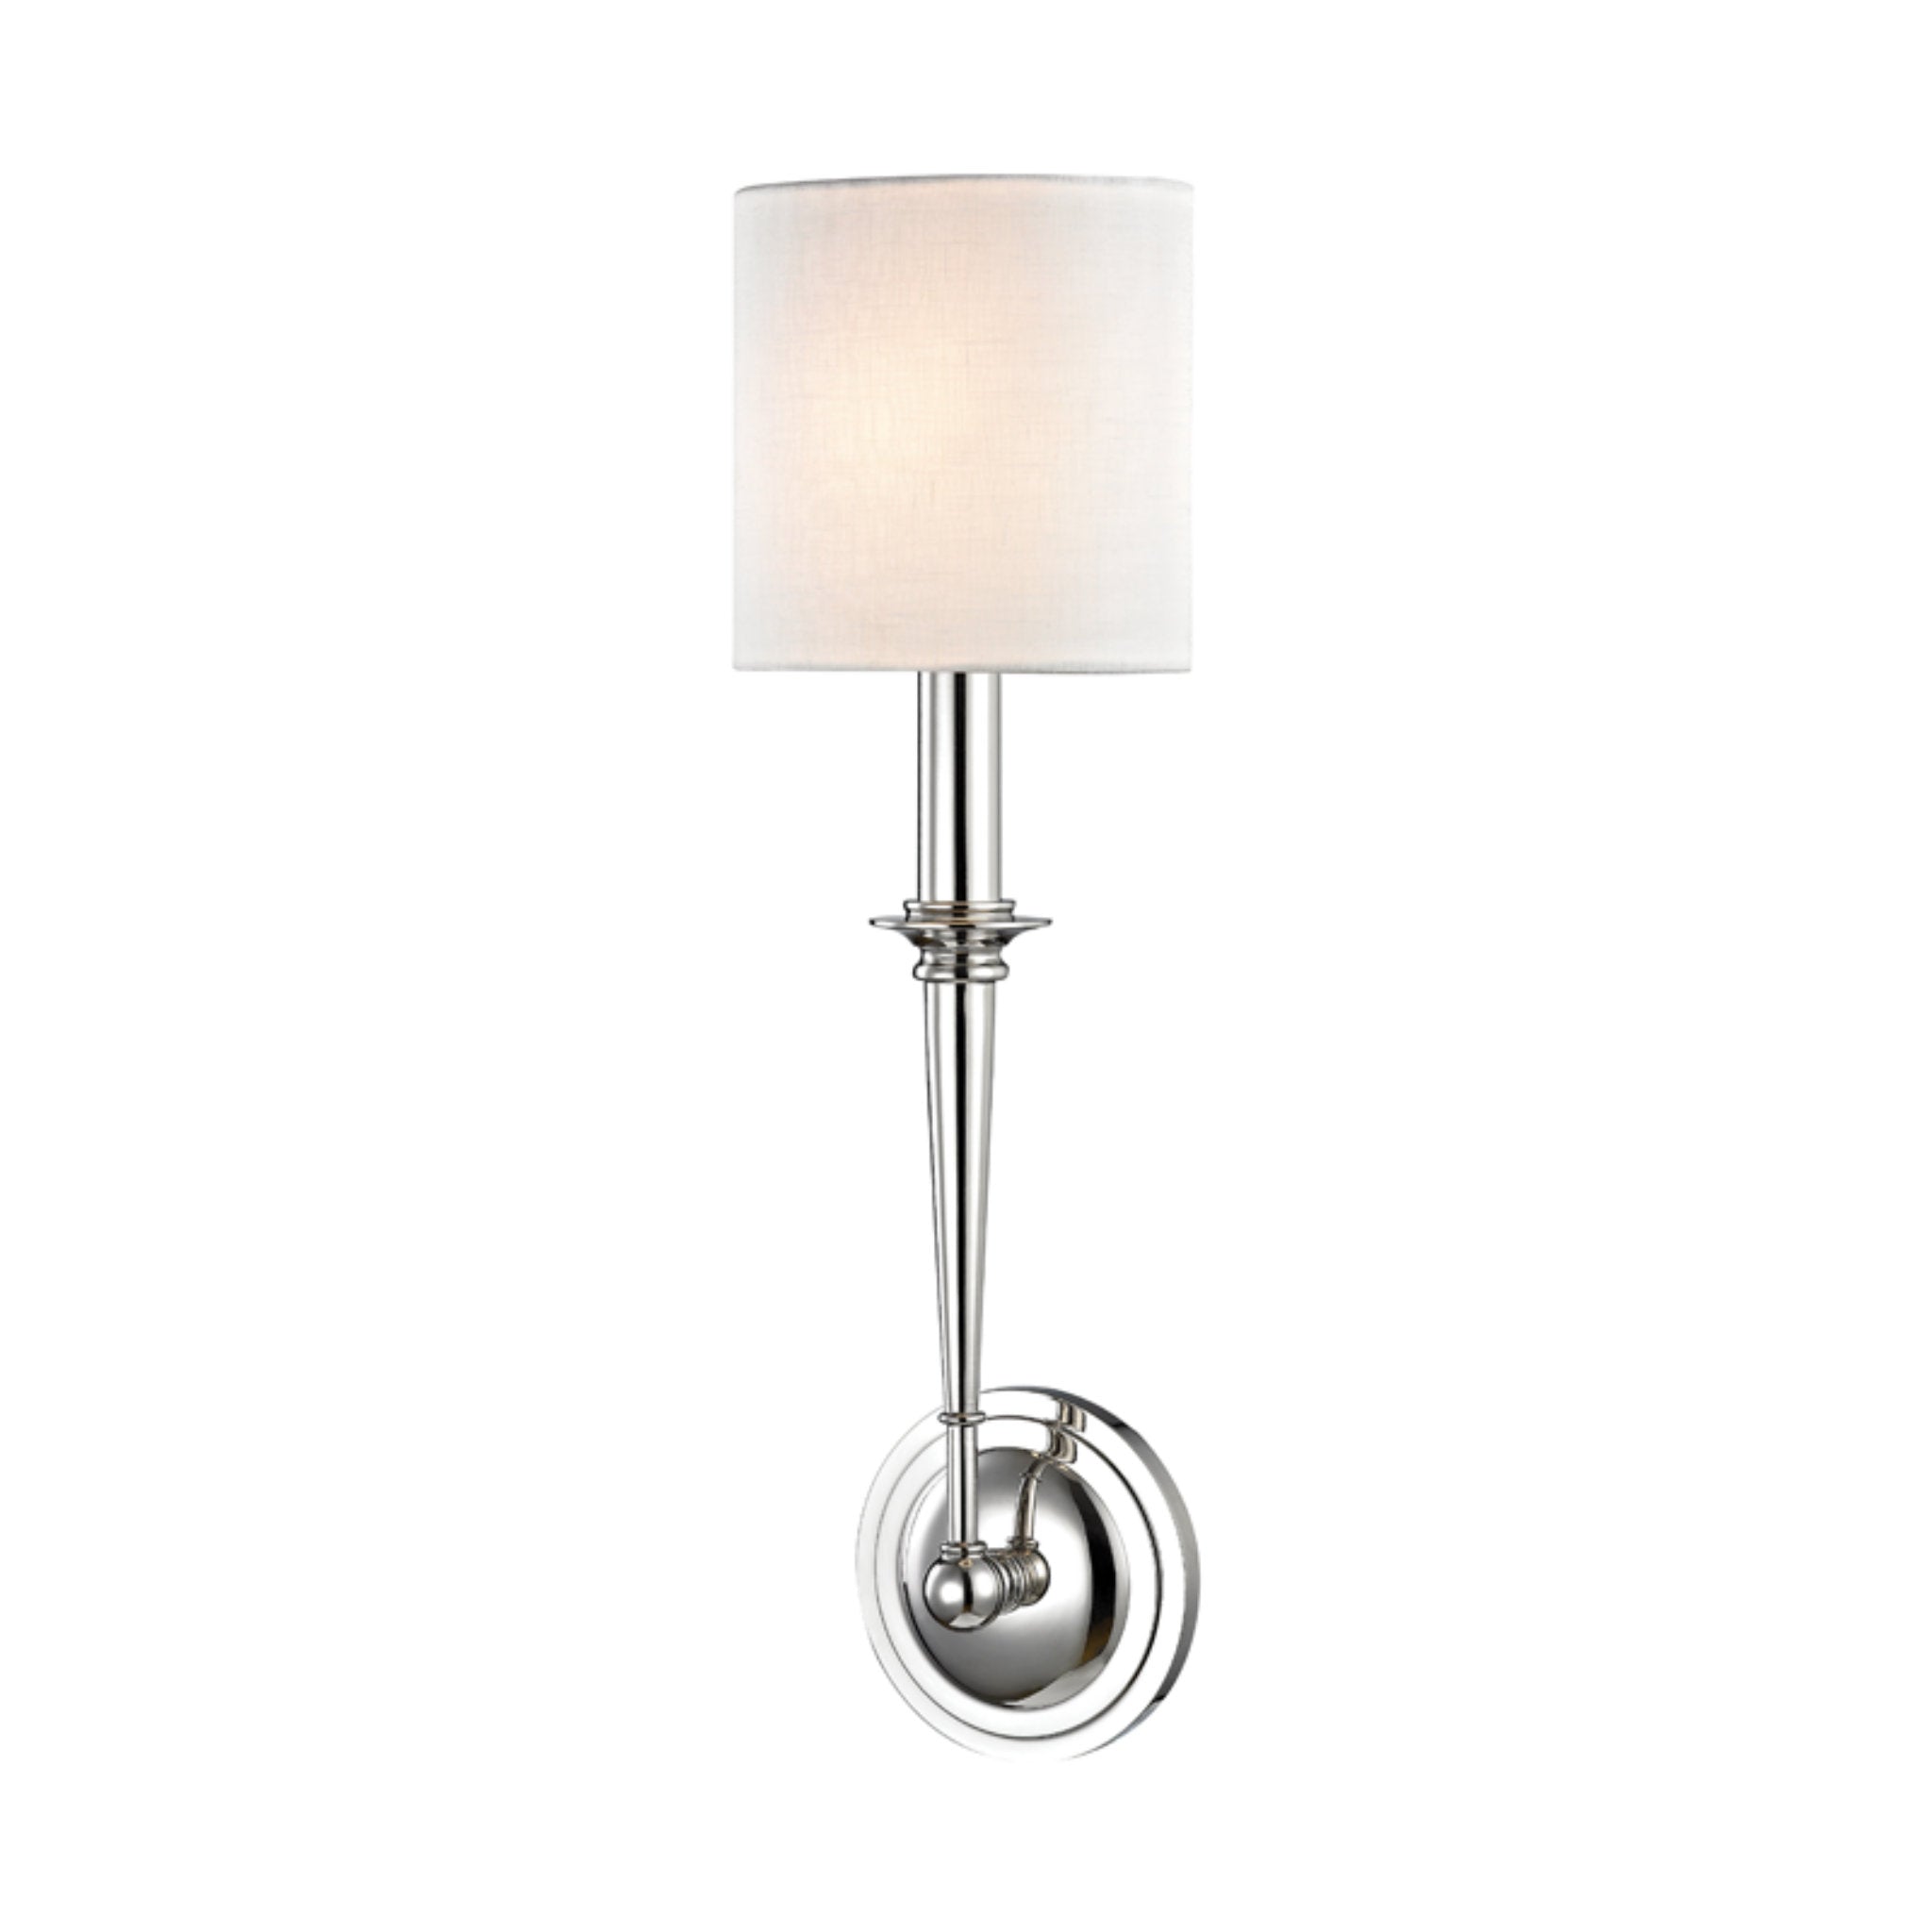 Lourdes 1 Light Wall Sconce in Polished Nickel